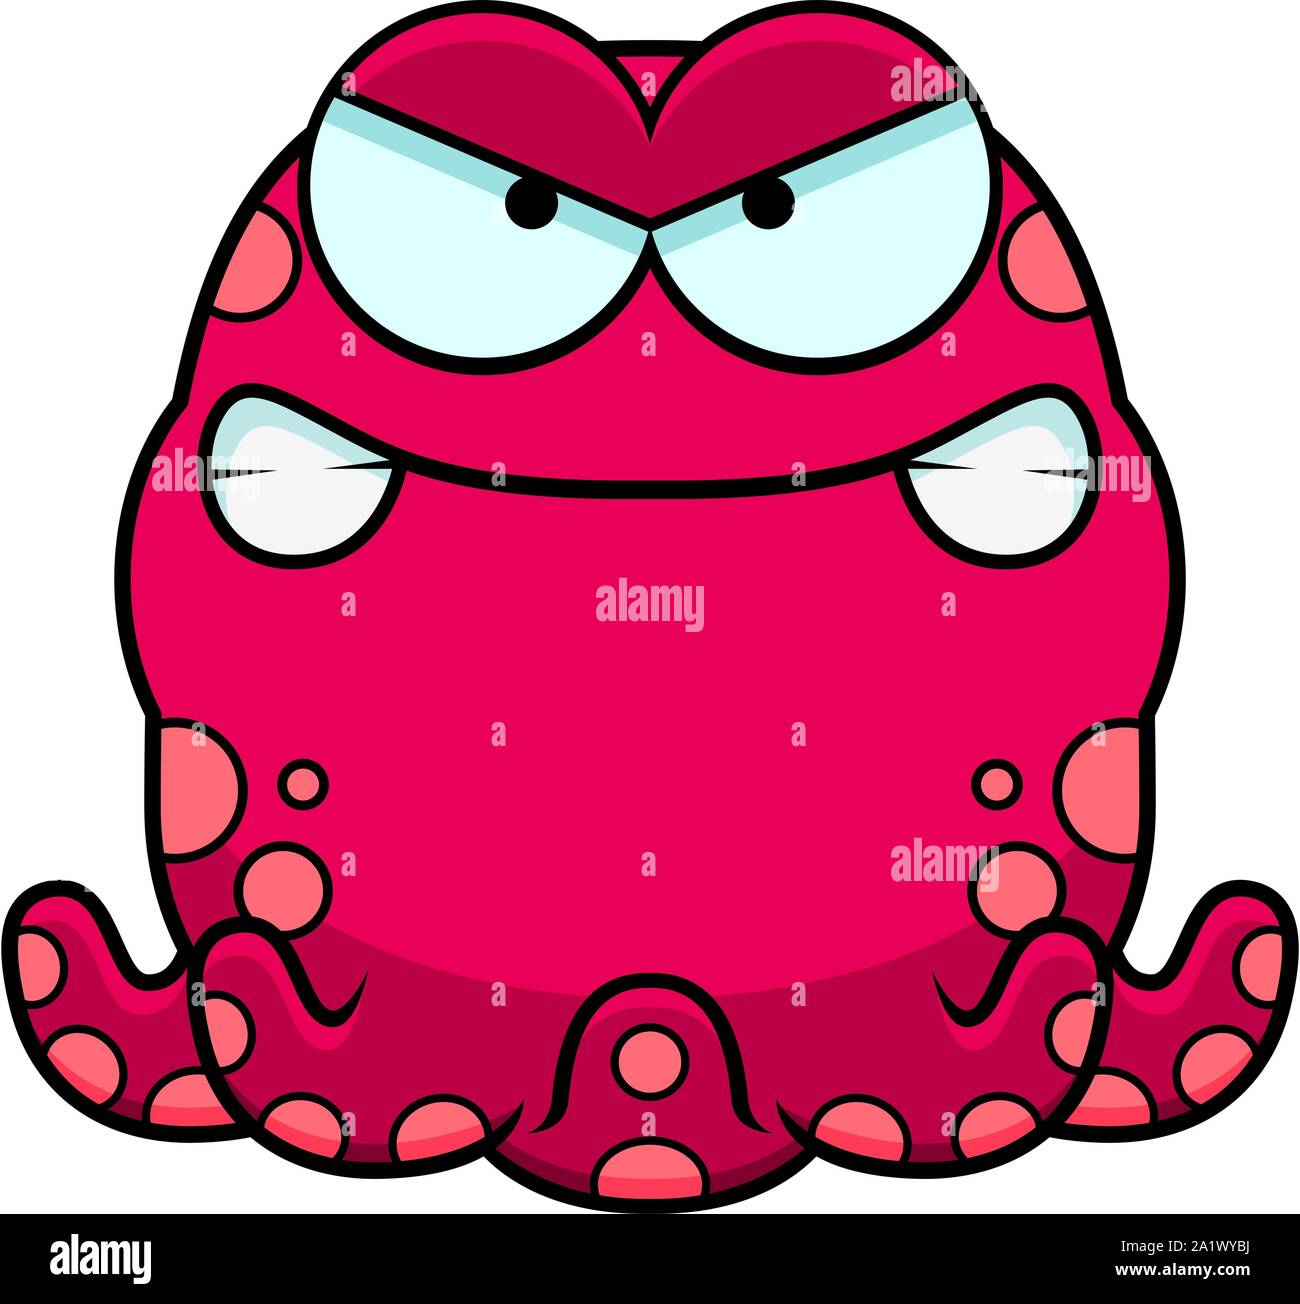 A cartoon illustration of a octopus looking angry. Stock Vector